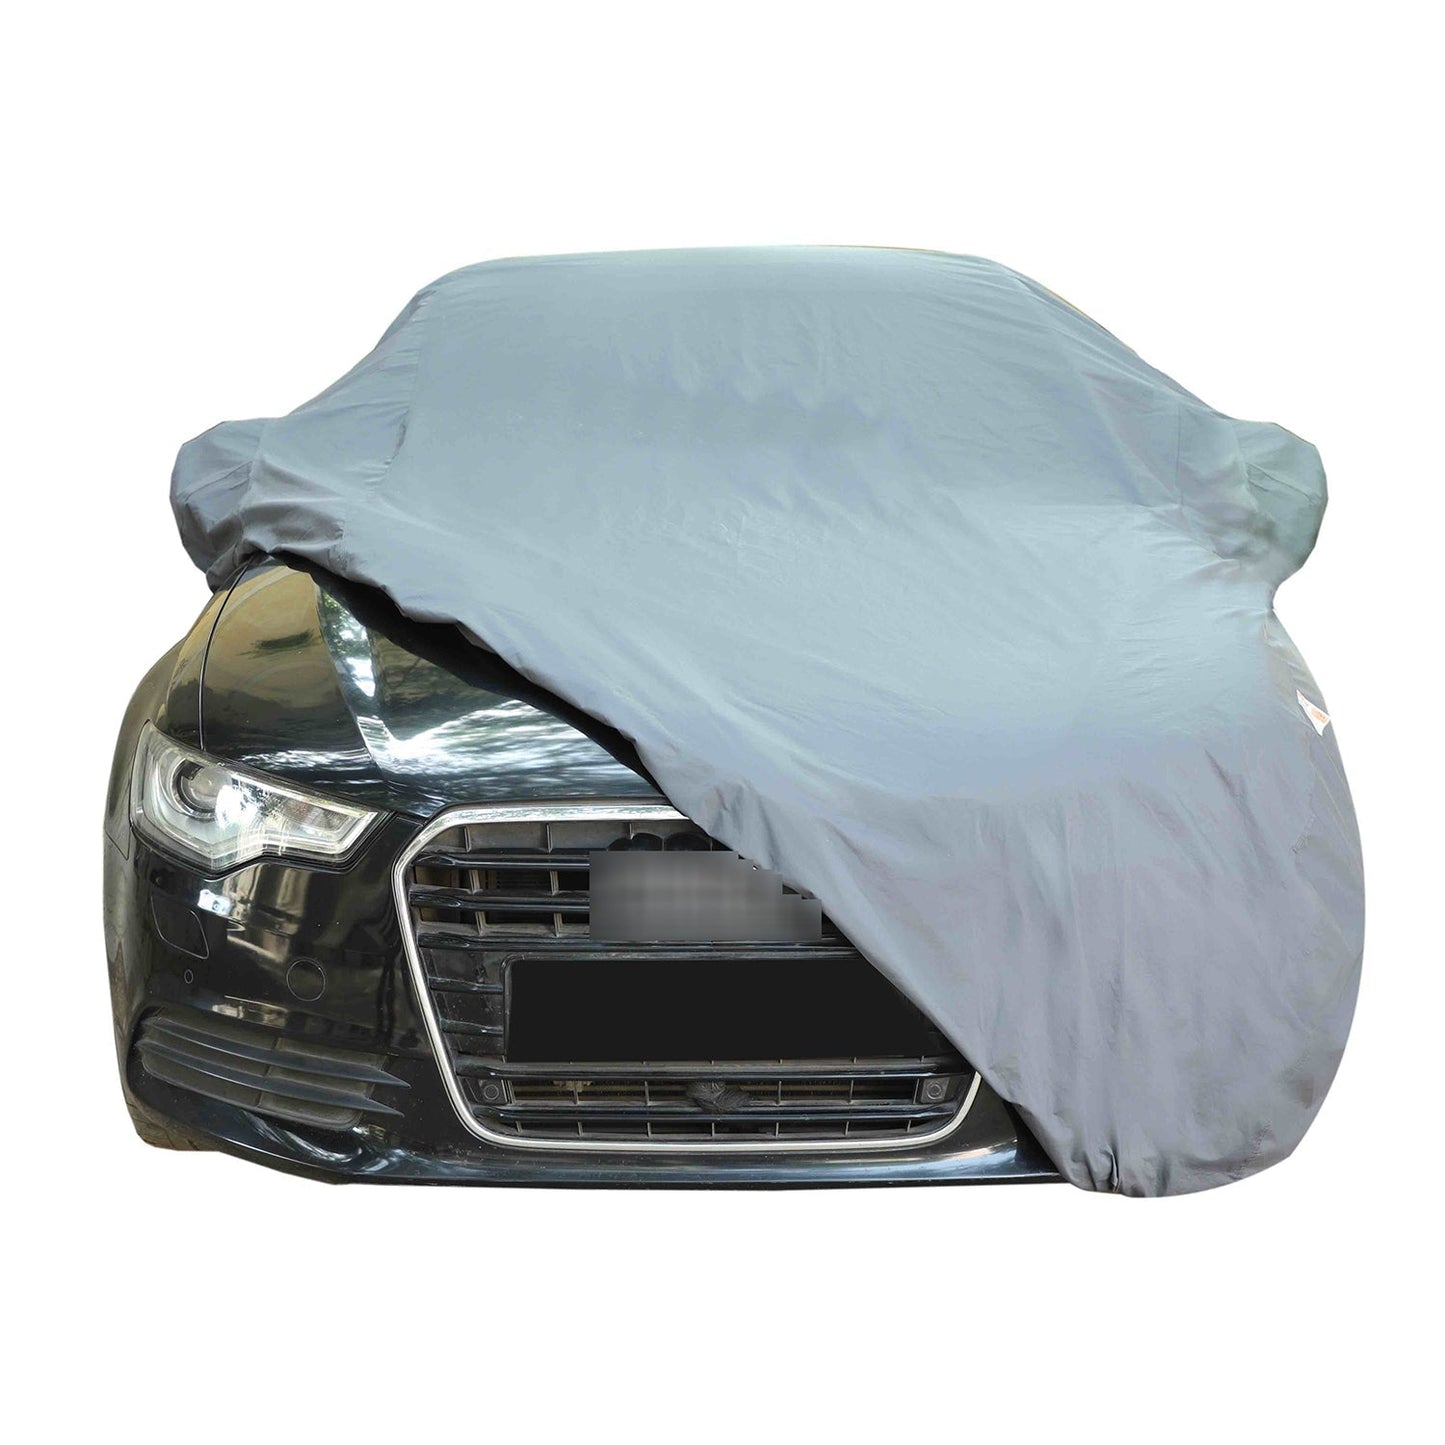 Oshotto Dark Grey 100% Anti Reflective, dustproof and Water Proof Car Body Cover with Mirror Pockets For Jaguar XJ